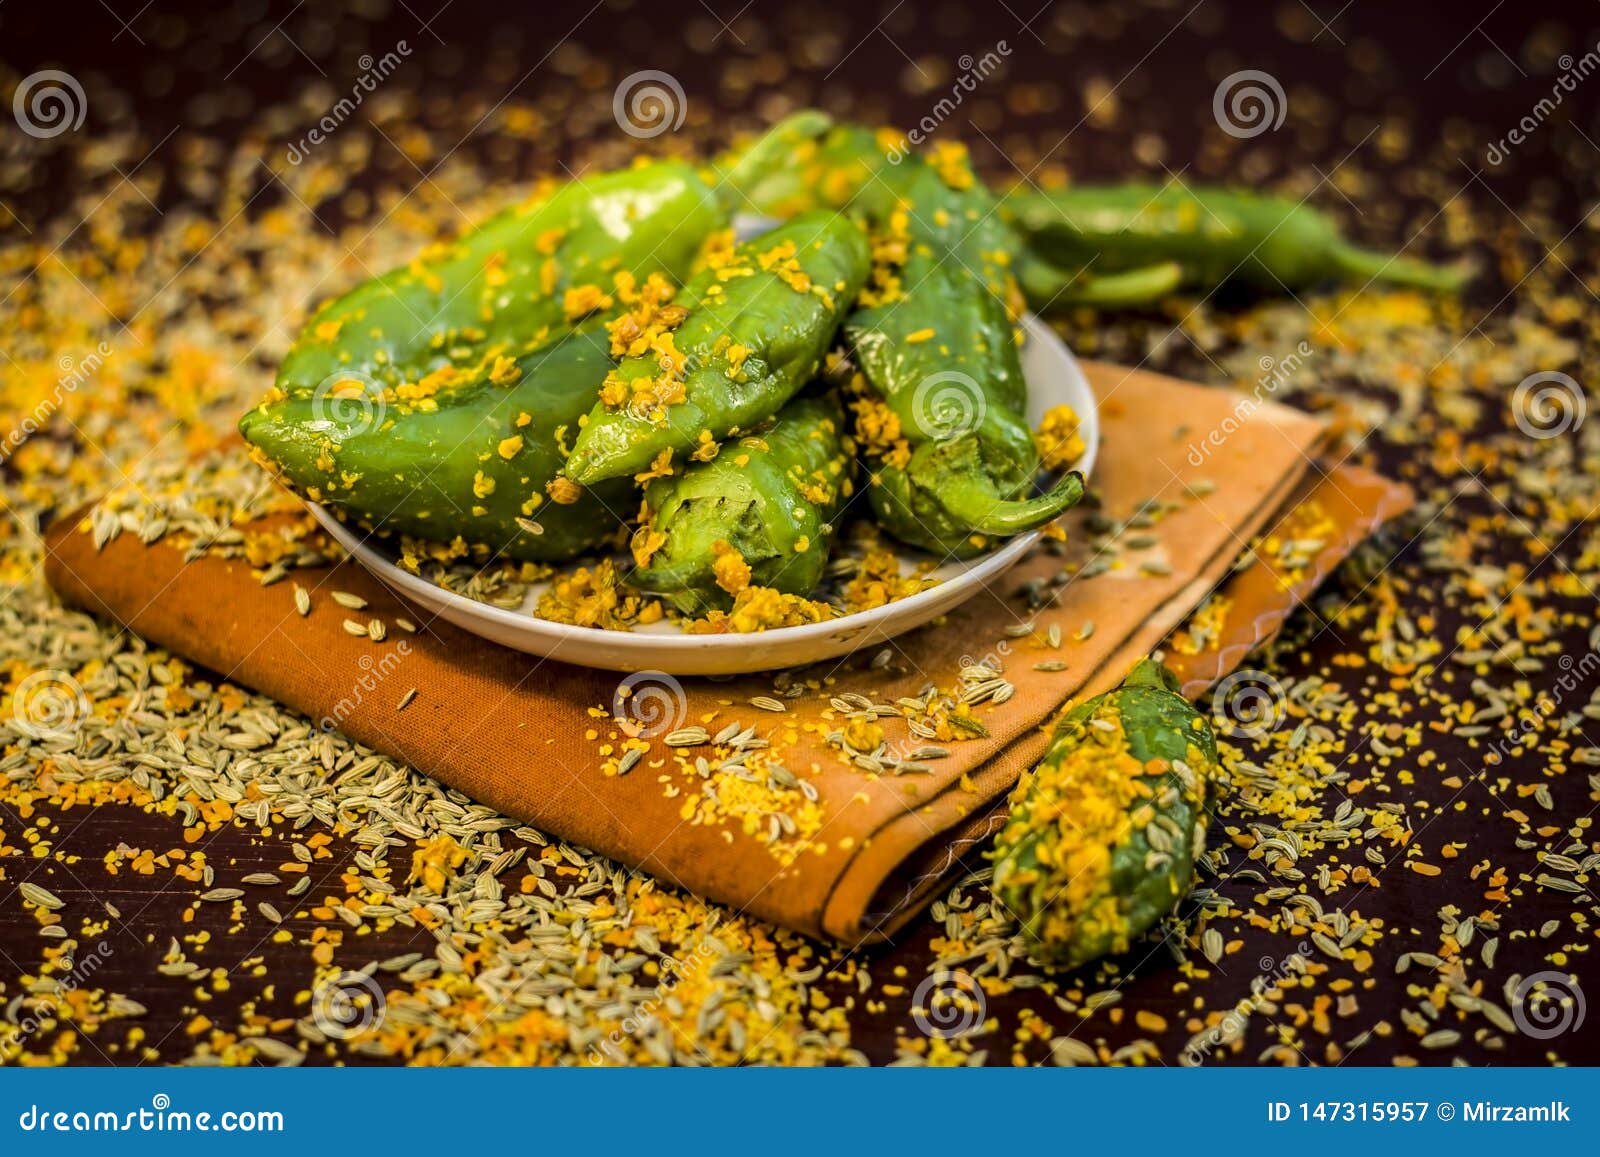 green chilli pickle marinated in mustard seeds and mustard oil. dark gothic style still life concept